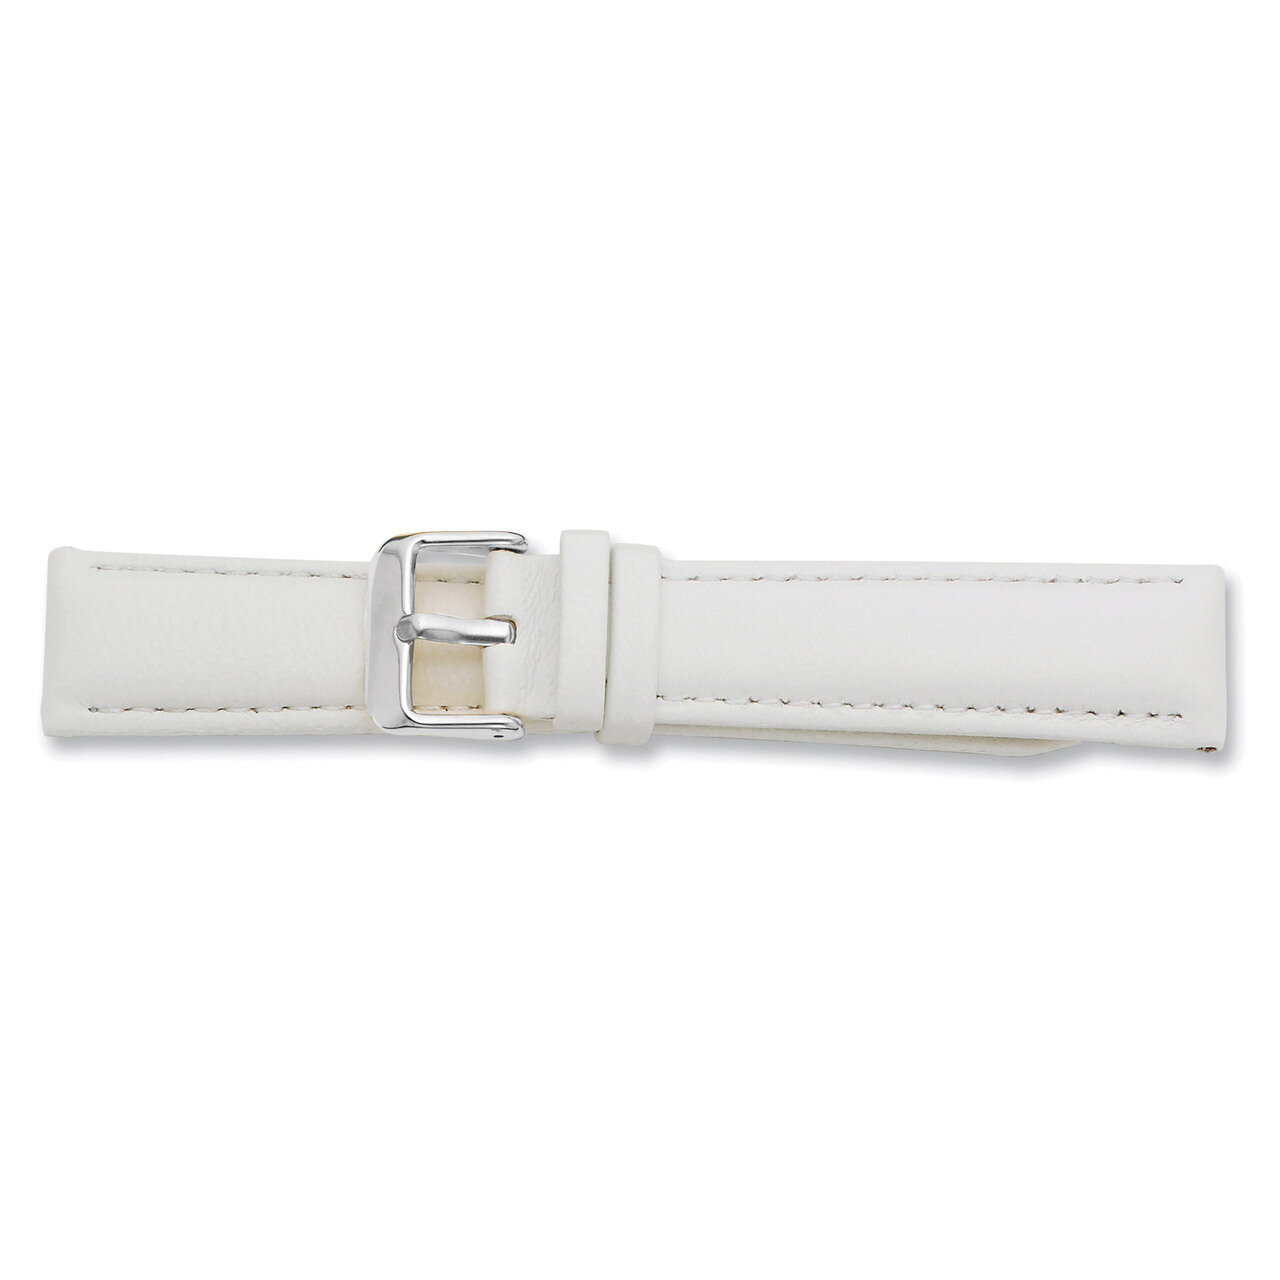 24mm White Glove Leather Watch Band 7.75 Inch Silver-tone Buckle BAW197-24